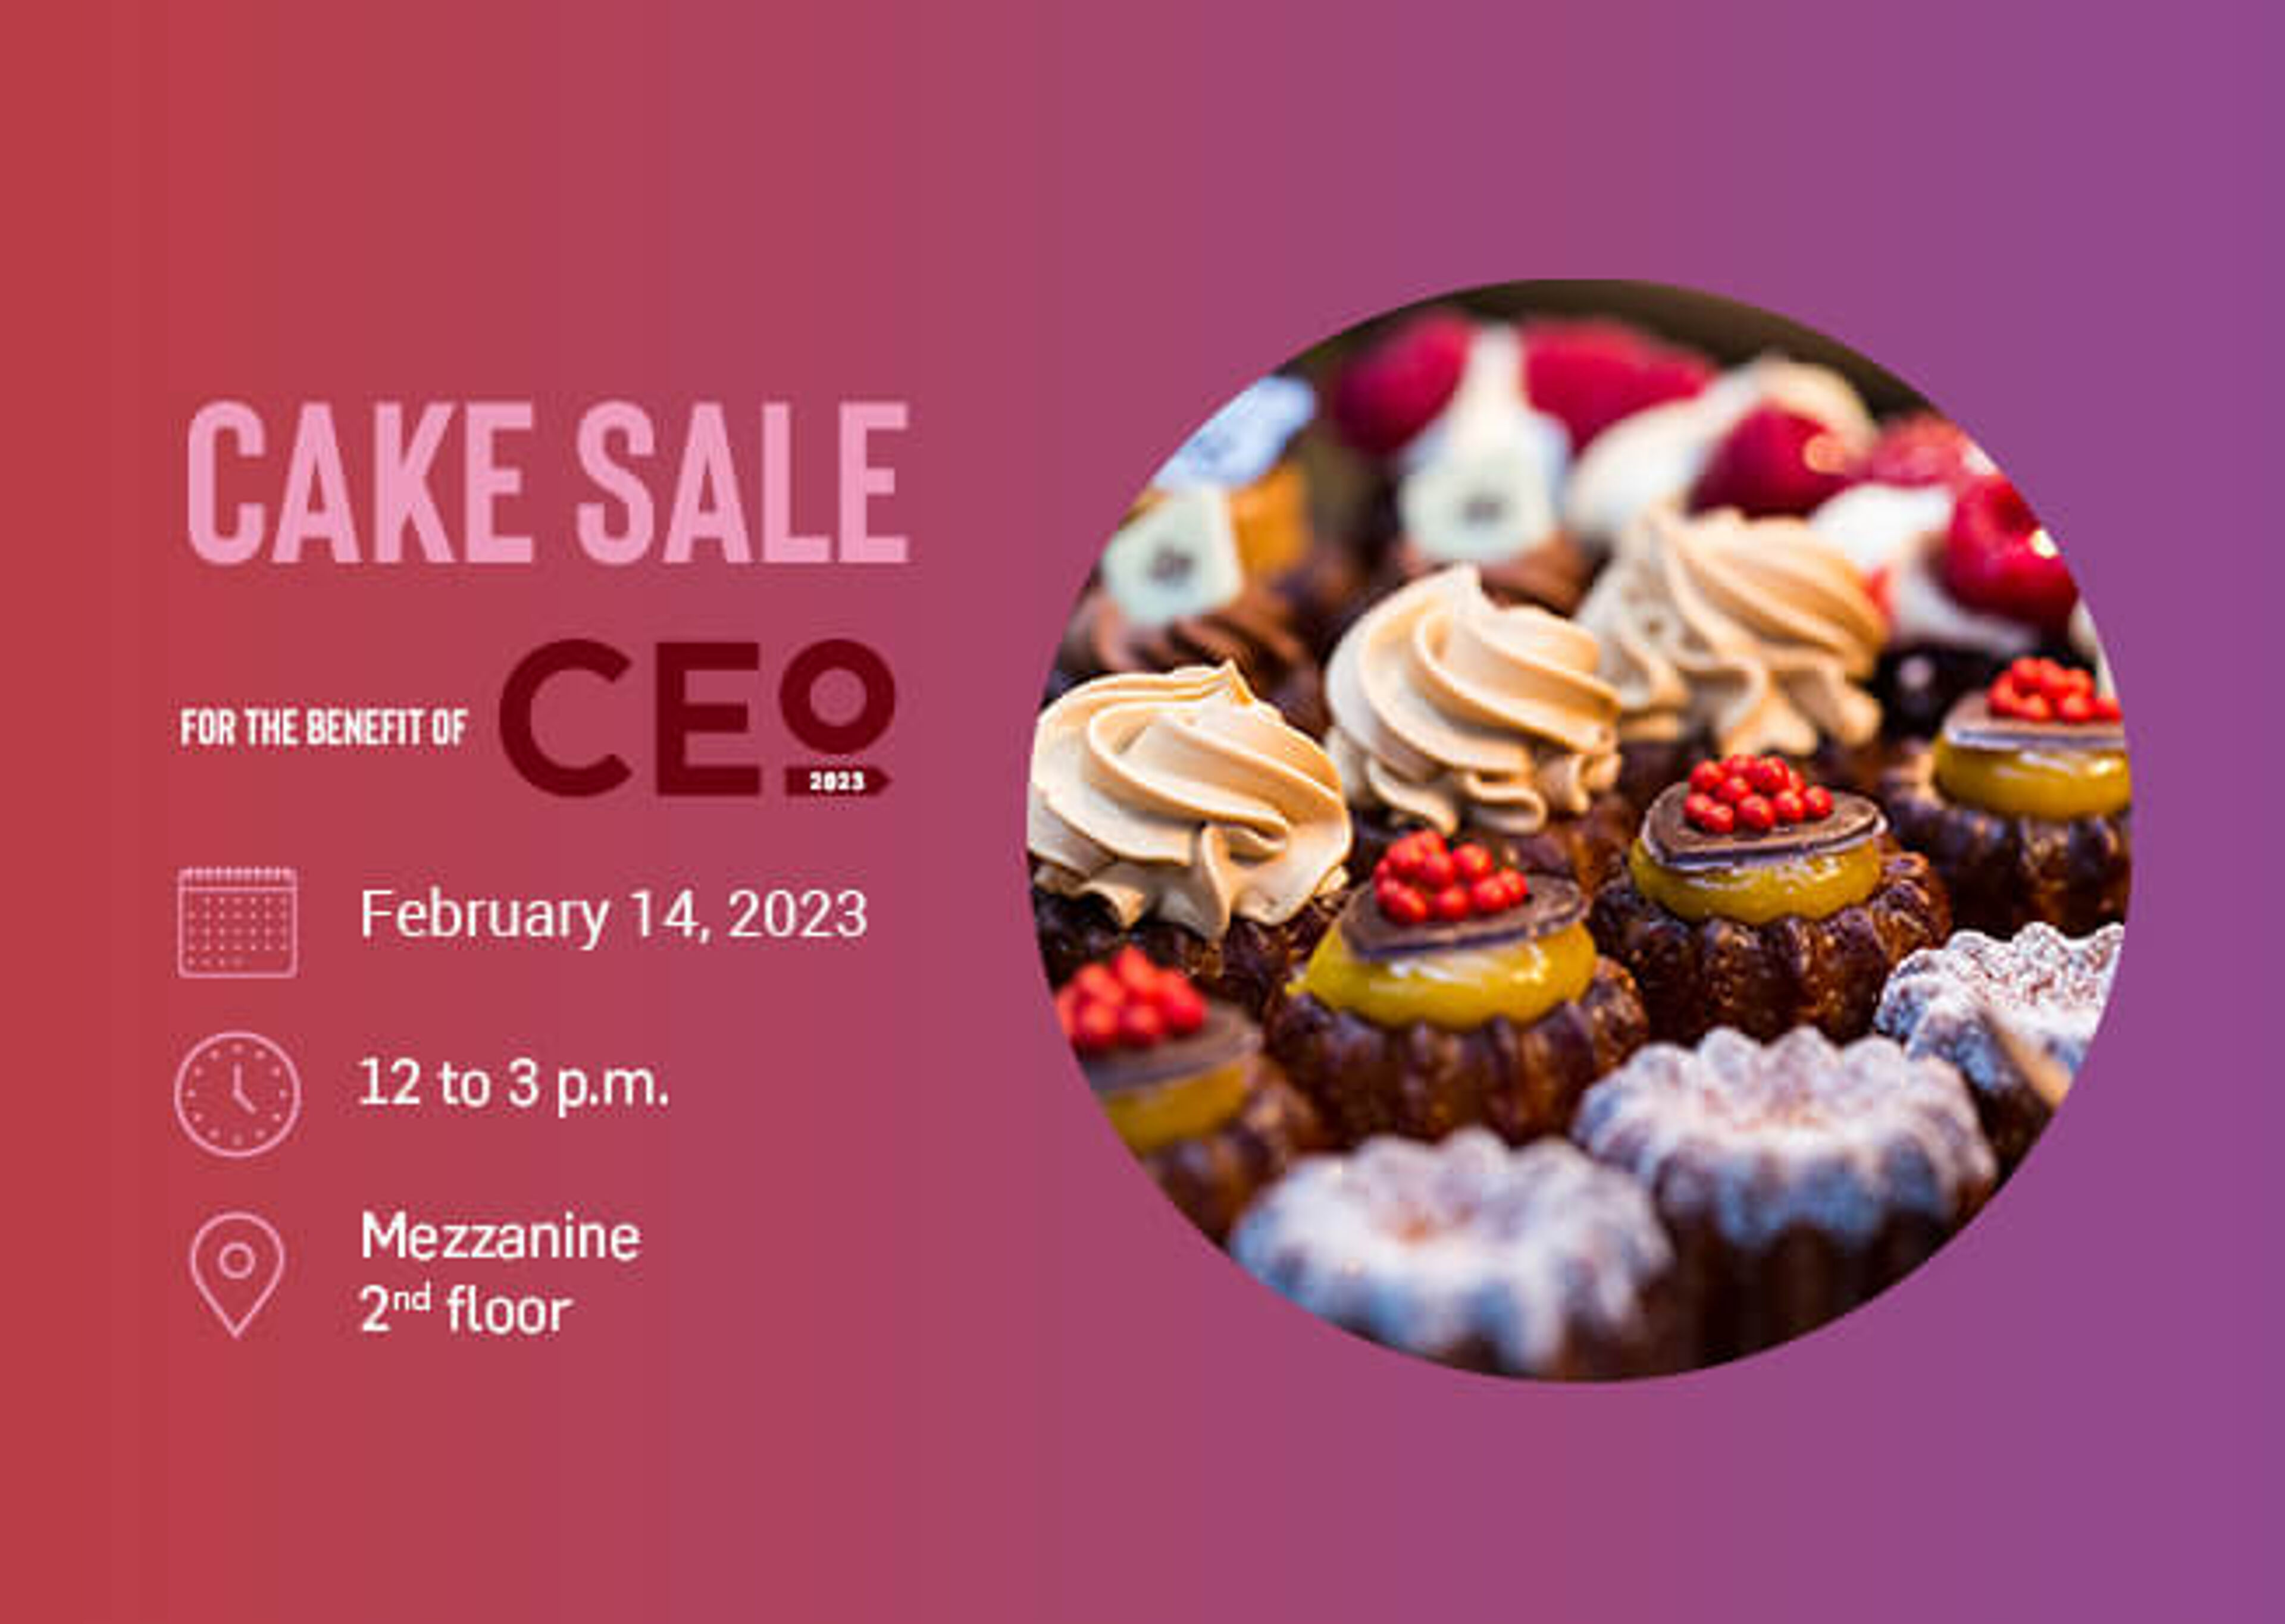 A flyer for a Cake Sale CEO event on February 14, 2023, featuring an assortment of decorated cupcakes, located on the mezzanine 2nd floor.